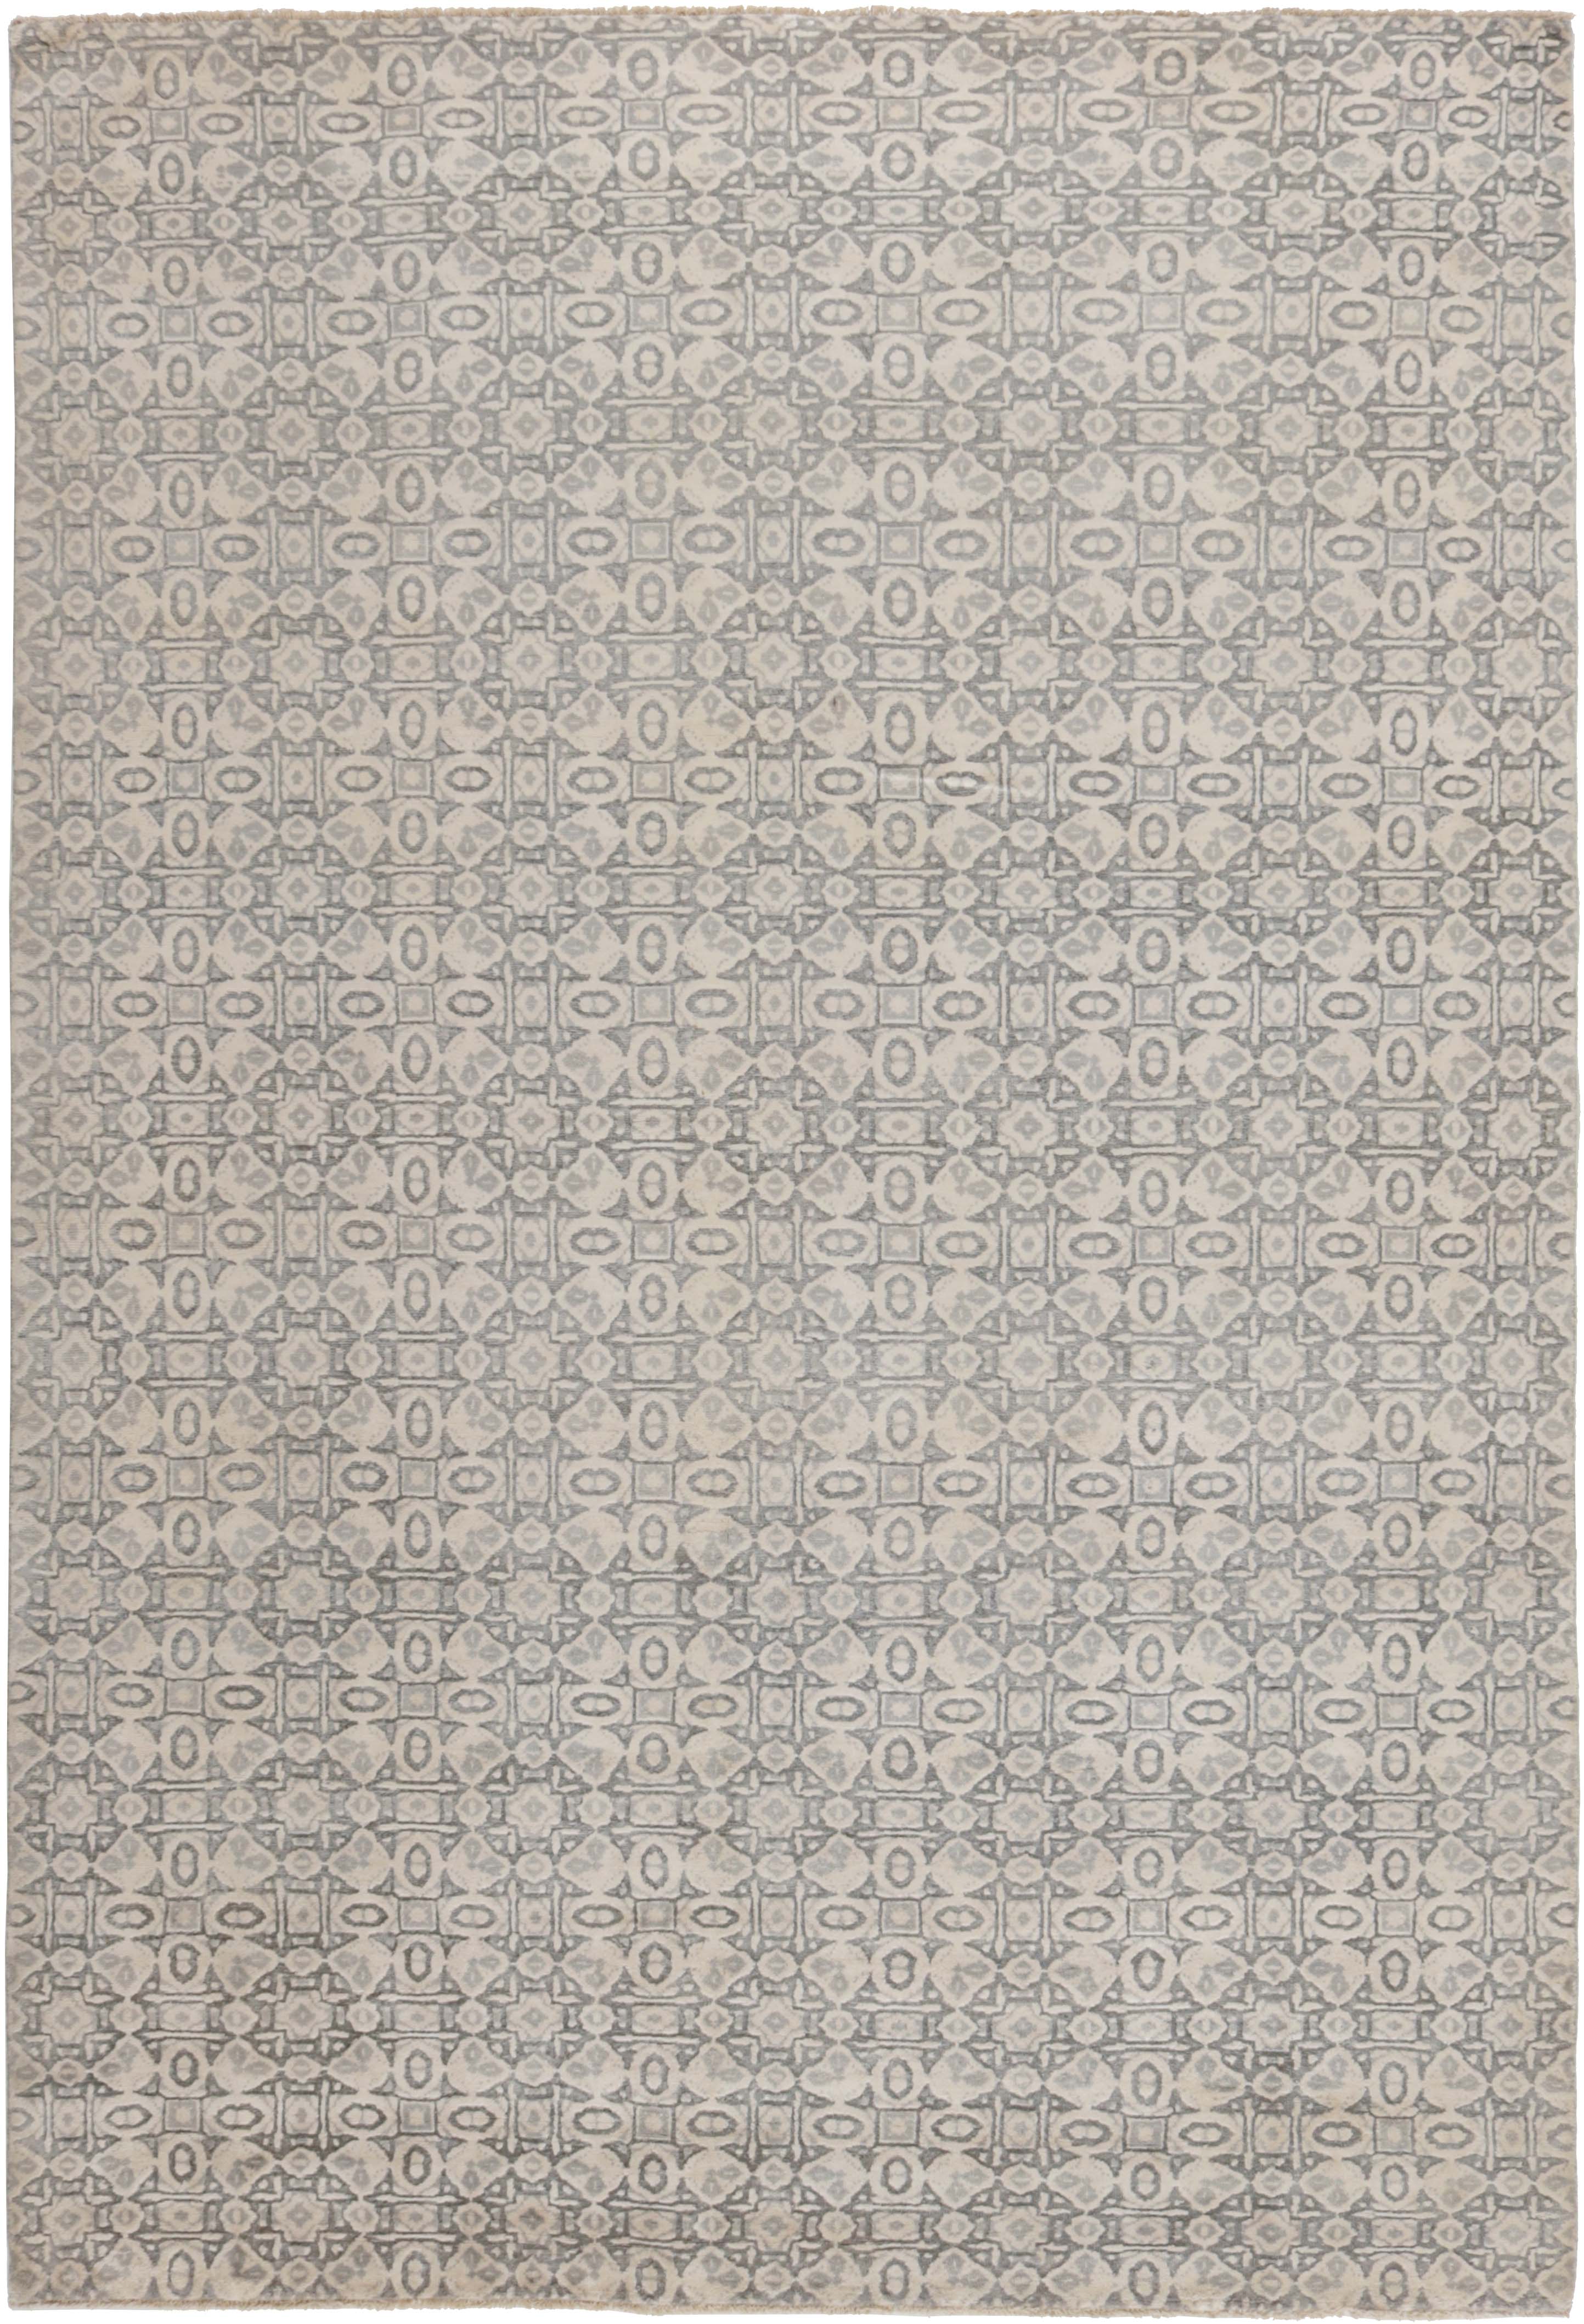 Authentic oriental rug with a damask pattern in blue